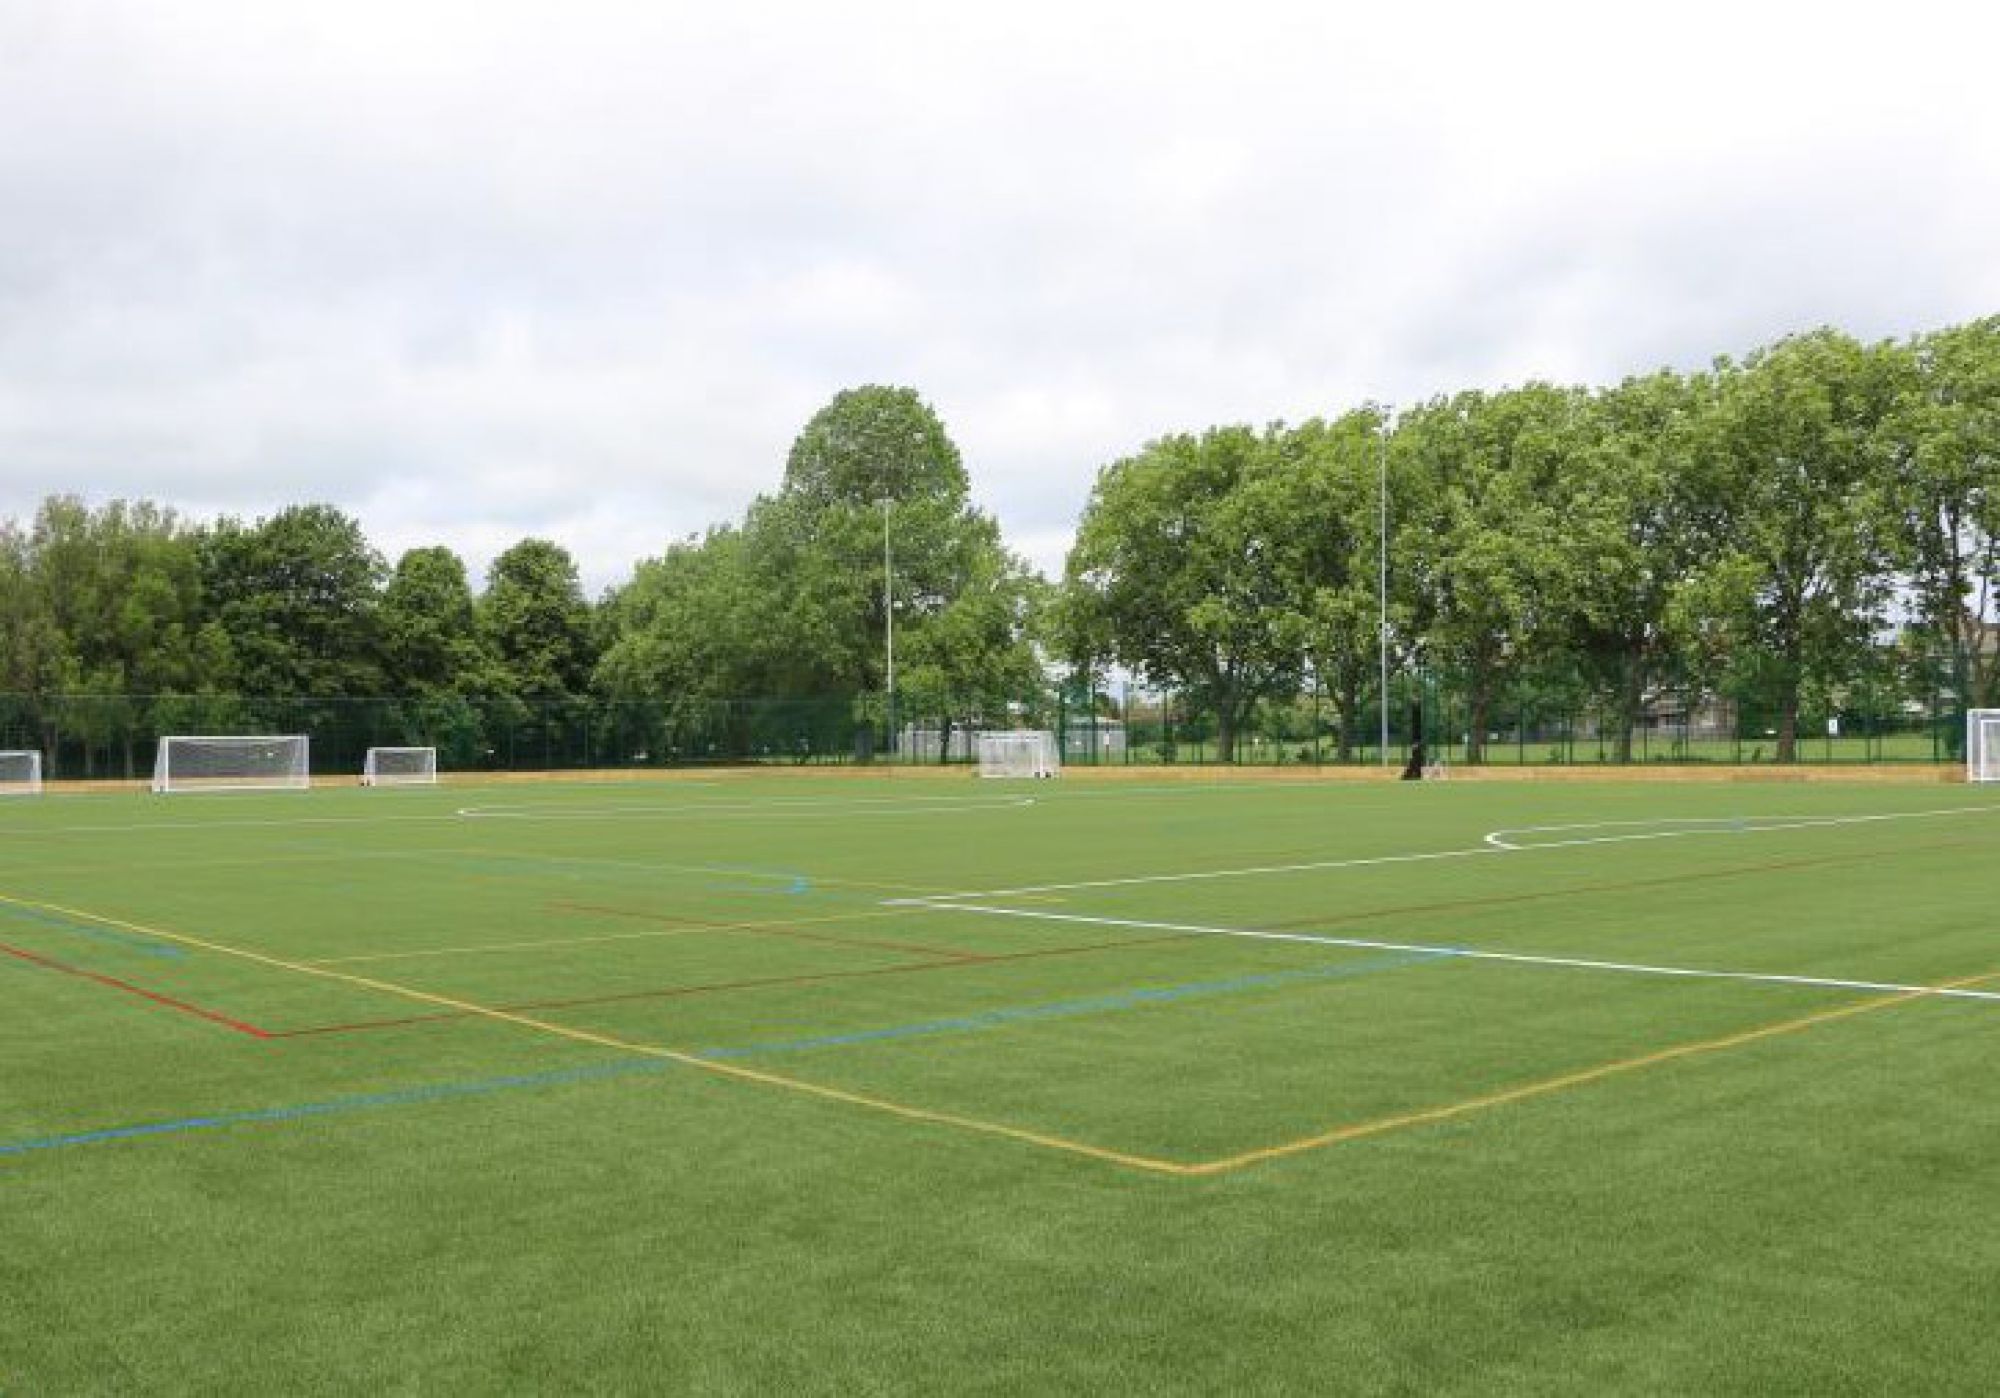 Full view of the new 3G pitch